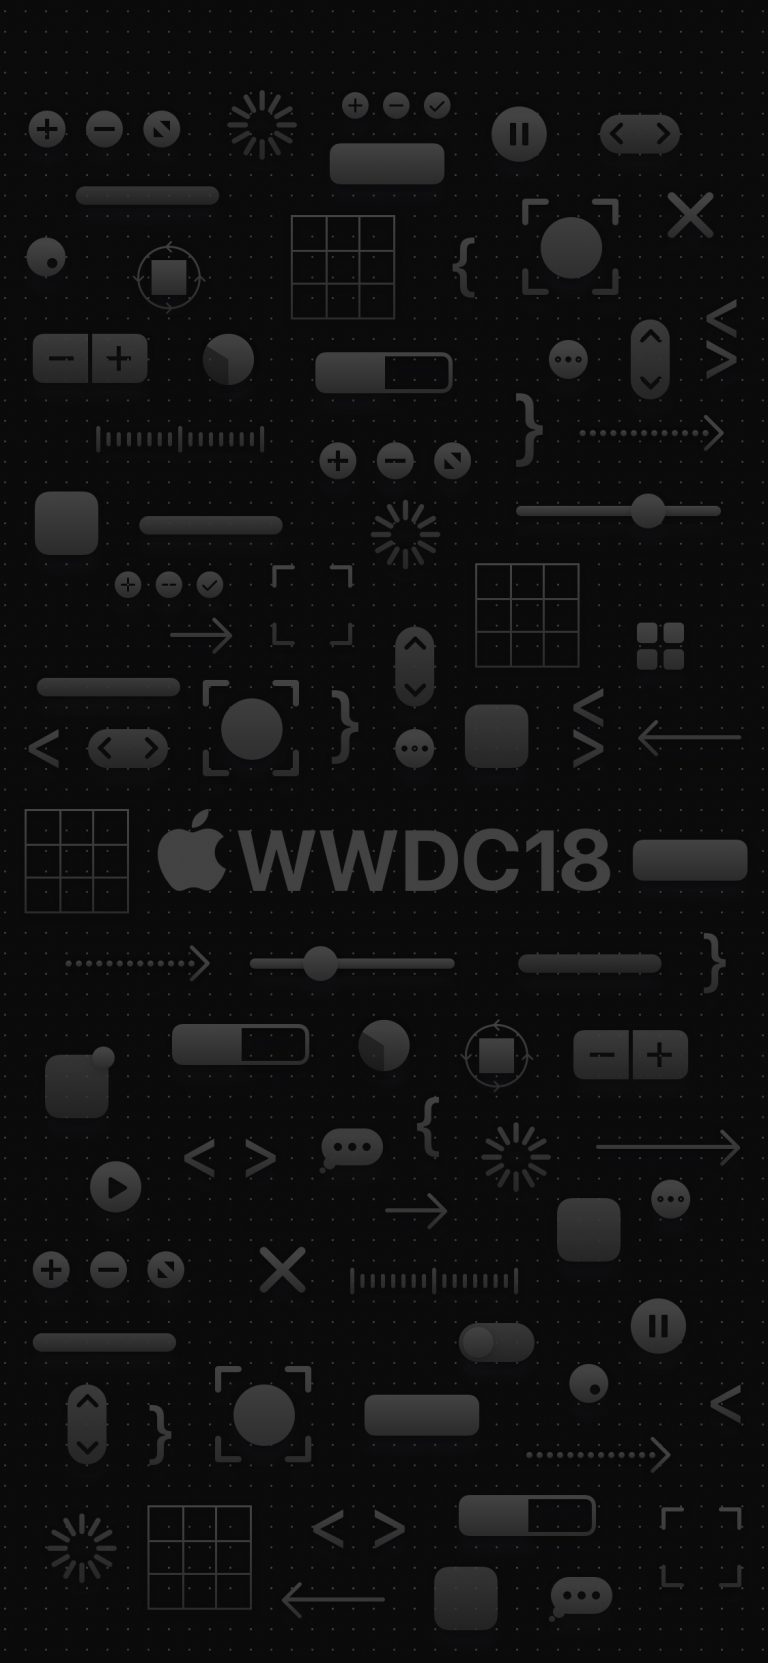 Cool iOS 13 Wallpaper Available for Free Download on any iPhone